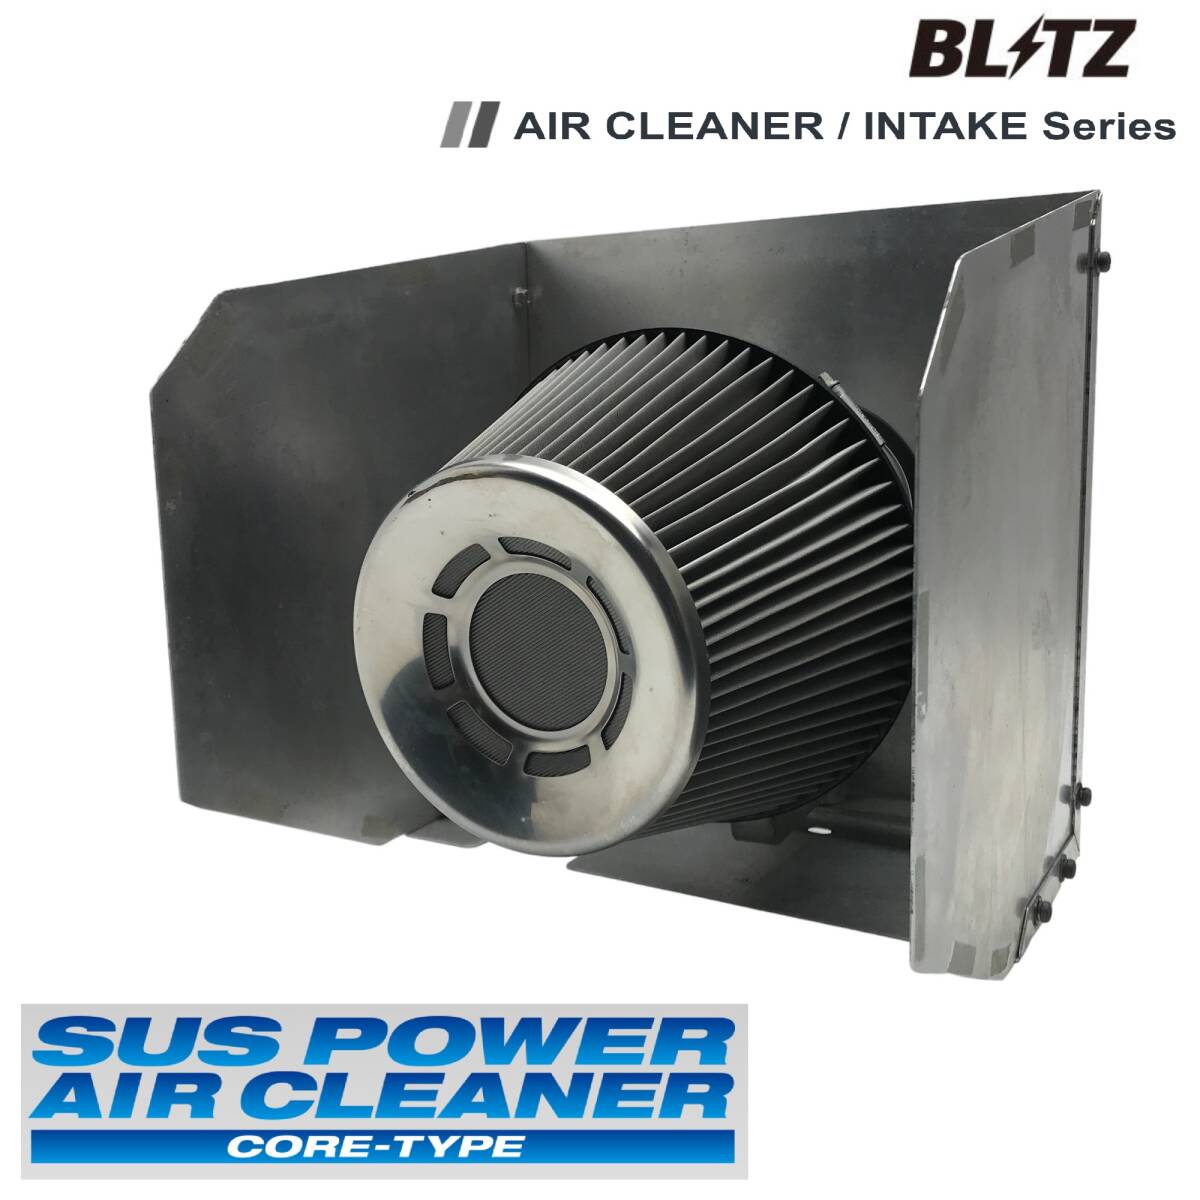 VRX-8 RX8 SE3P 13B-MSP BLITZ Blitz SUS power air cleaner .. board kit normal air flow attaching 197400-2010 prompt decision / immediate payment V